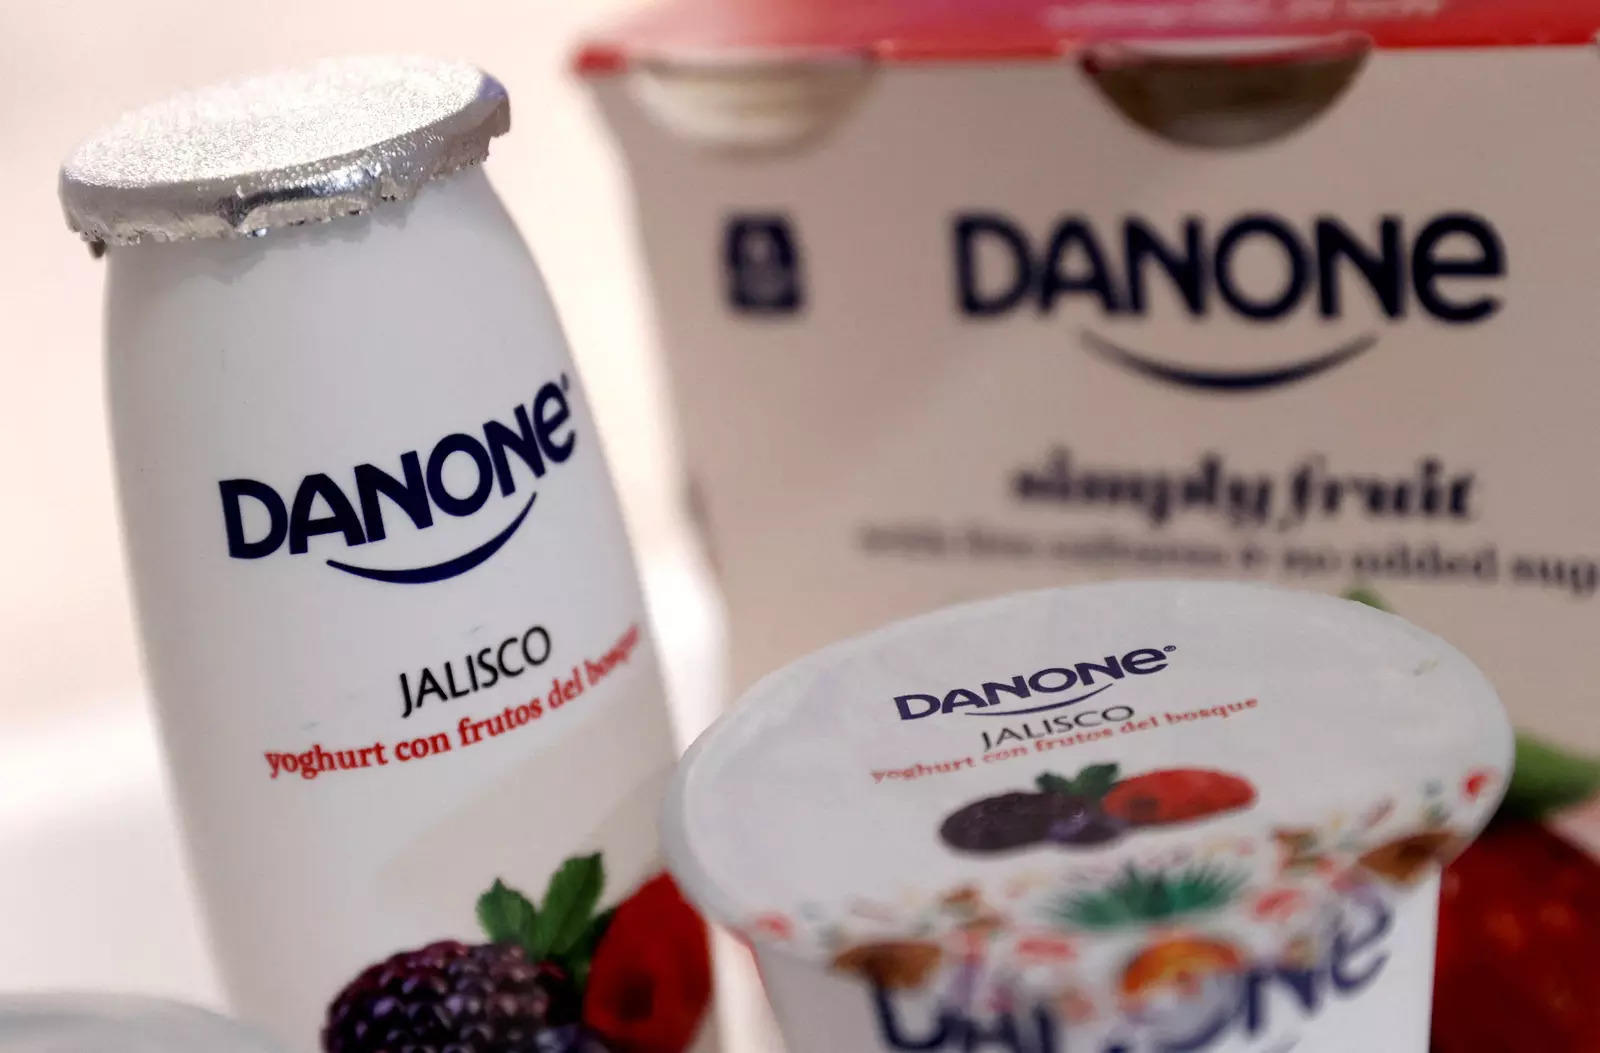 Danone sources whey from east as costs in Europe rise